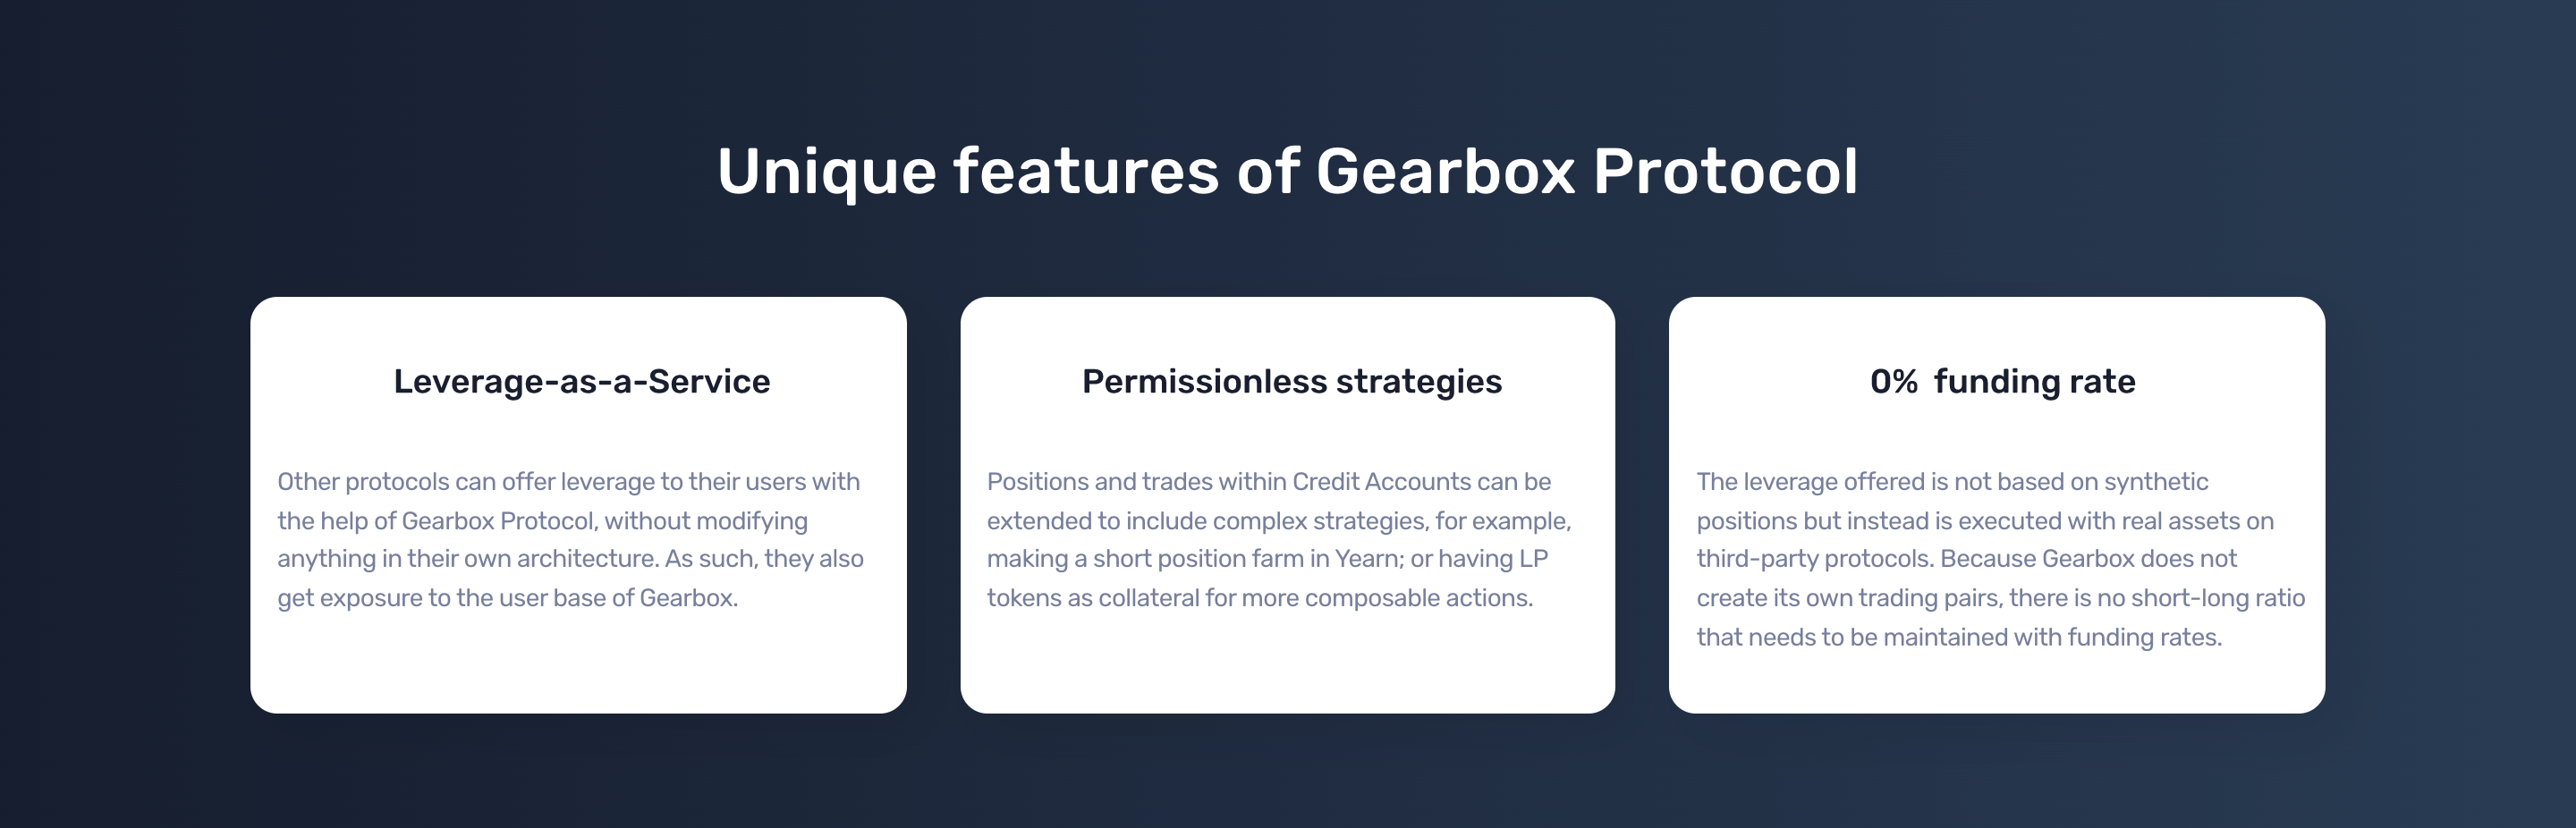 Gearbox Protocol Features